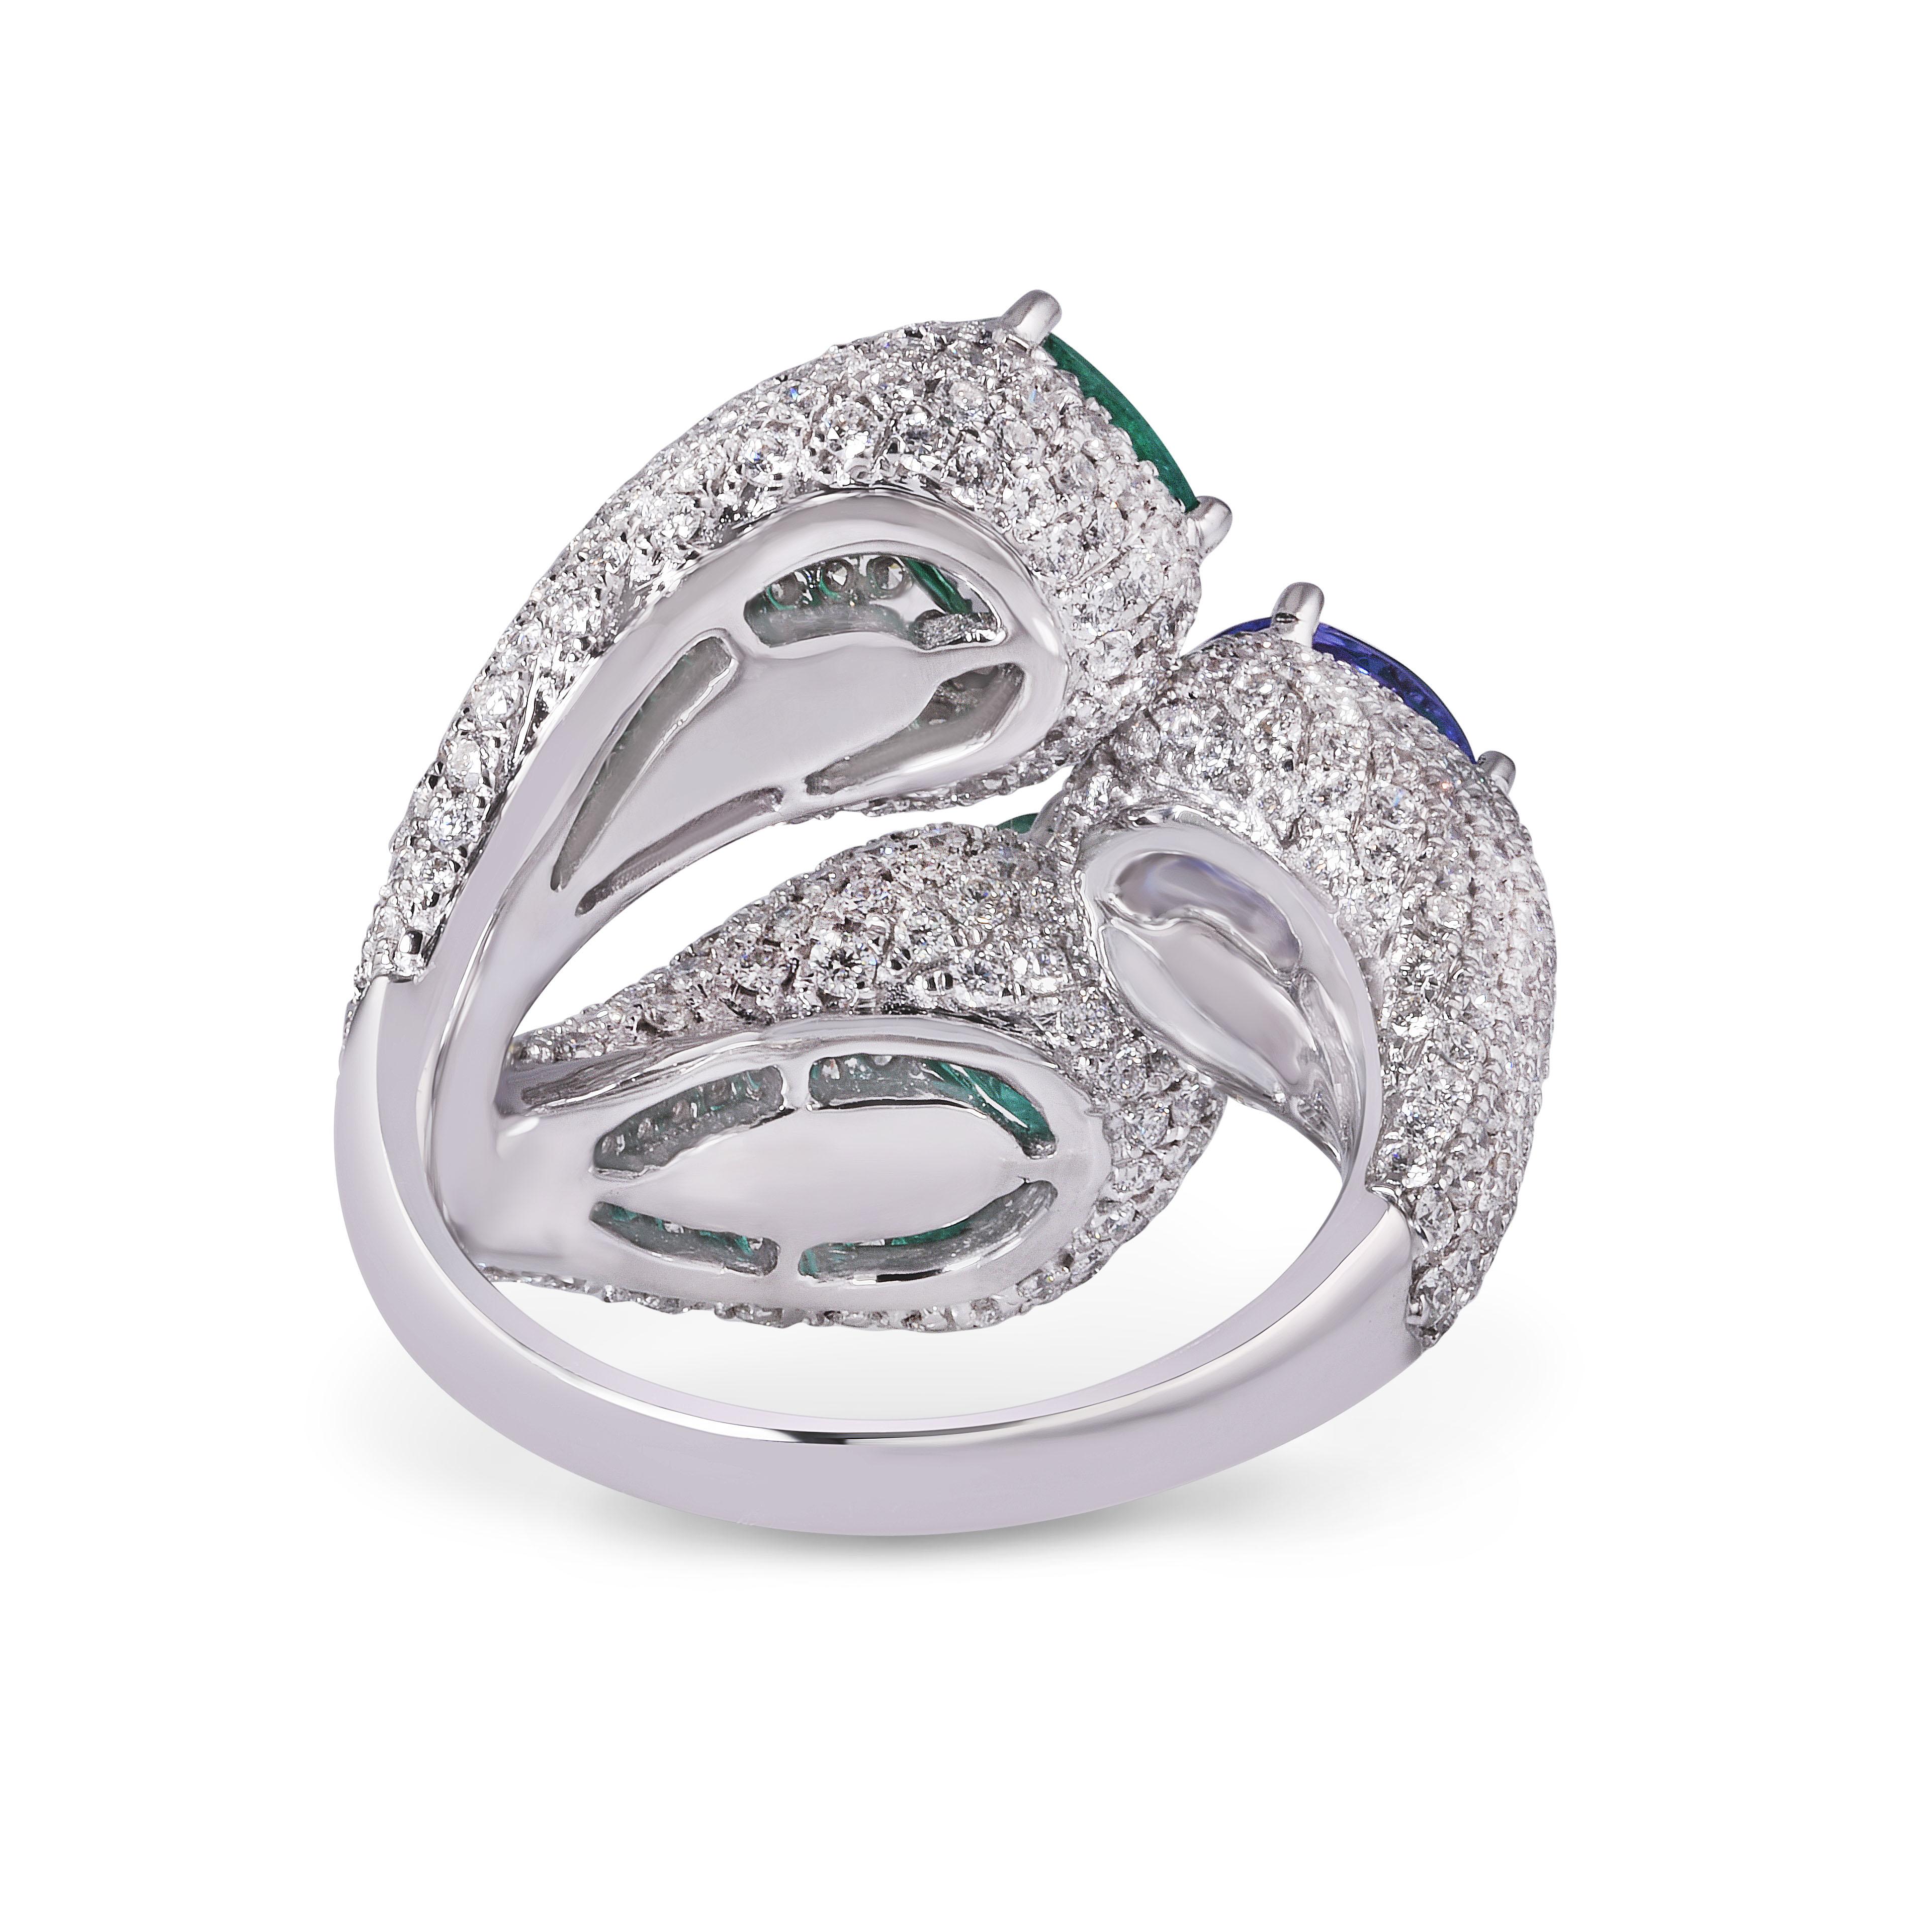 Inspired by the wreathing curl of nature's vines, this pave diamond set ring envelopes the finger, culminating in vivid cushion cut emeralds and a 1.28ct Tanzanite. 

Tanzanite weight 1.28cts.
Total diamond weight 2.93cts. 
Diamonds are G/H colour